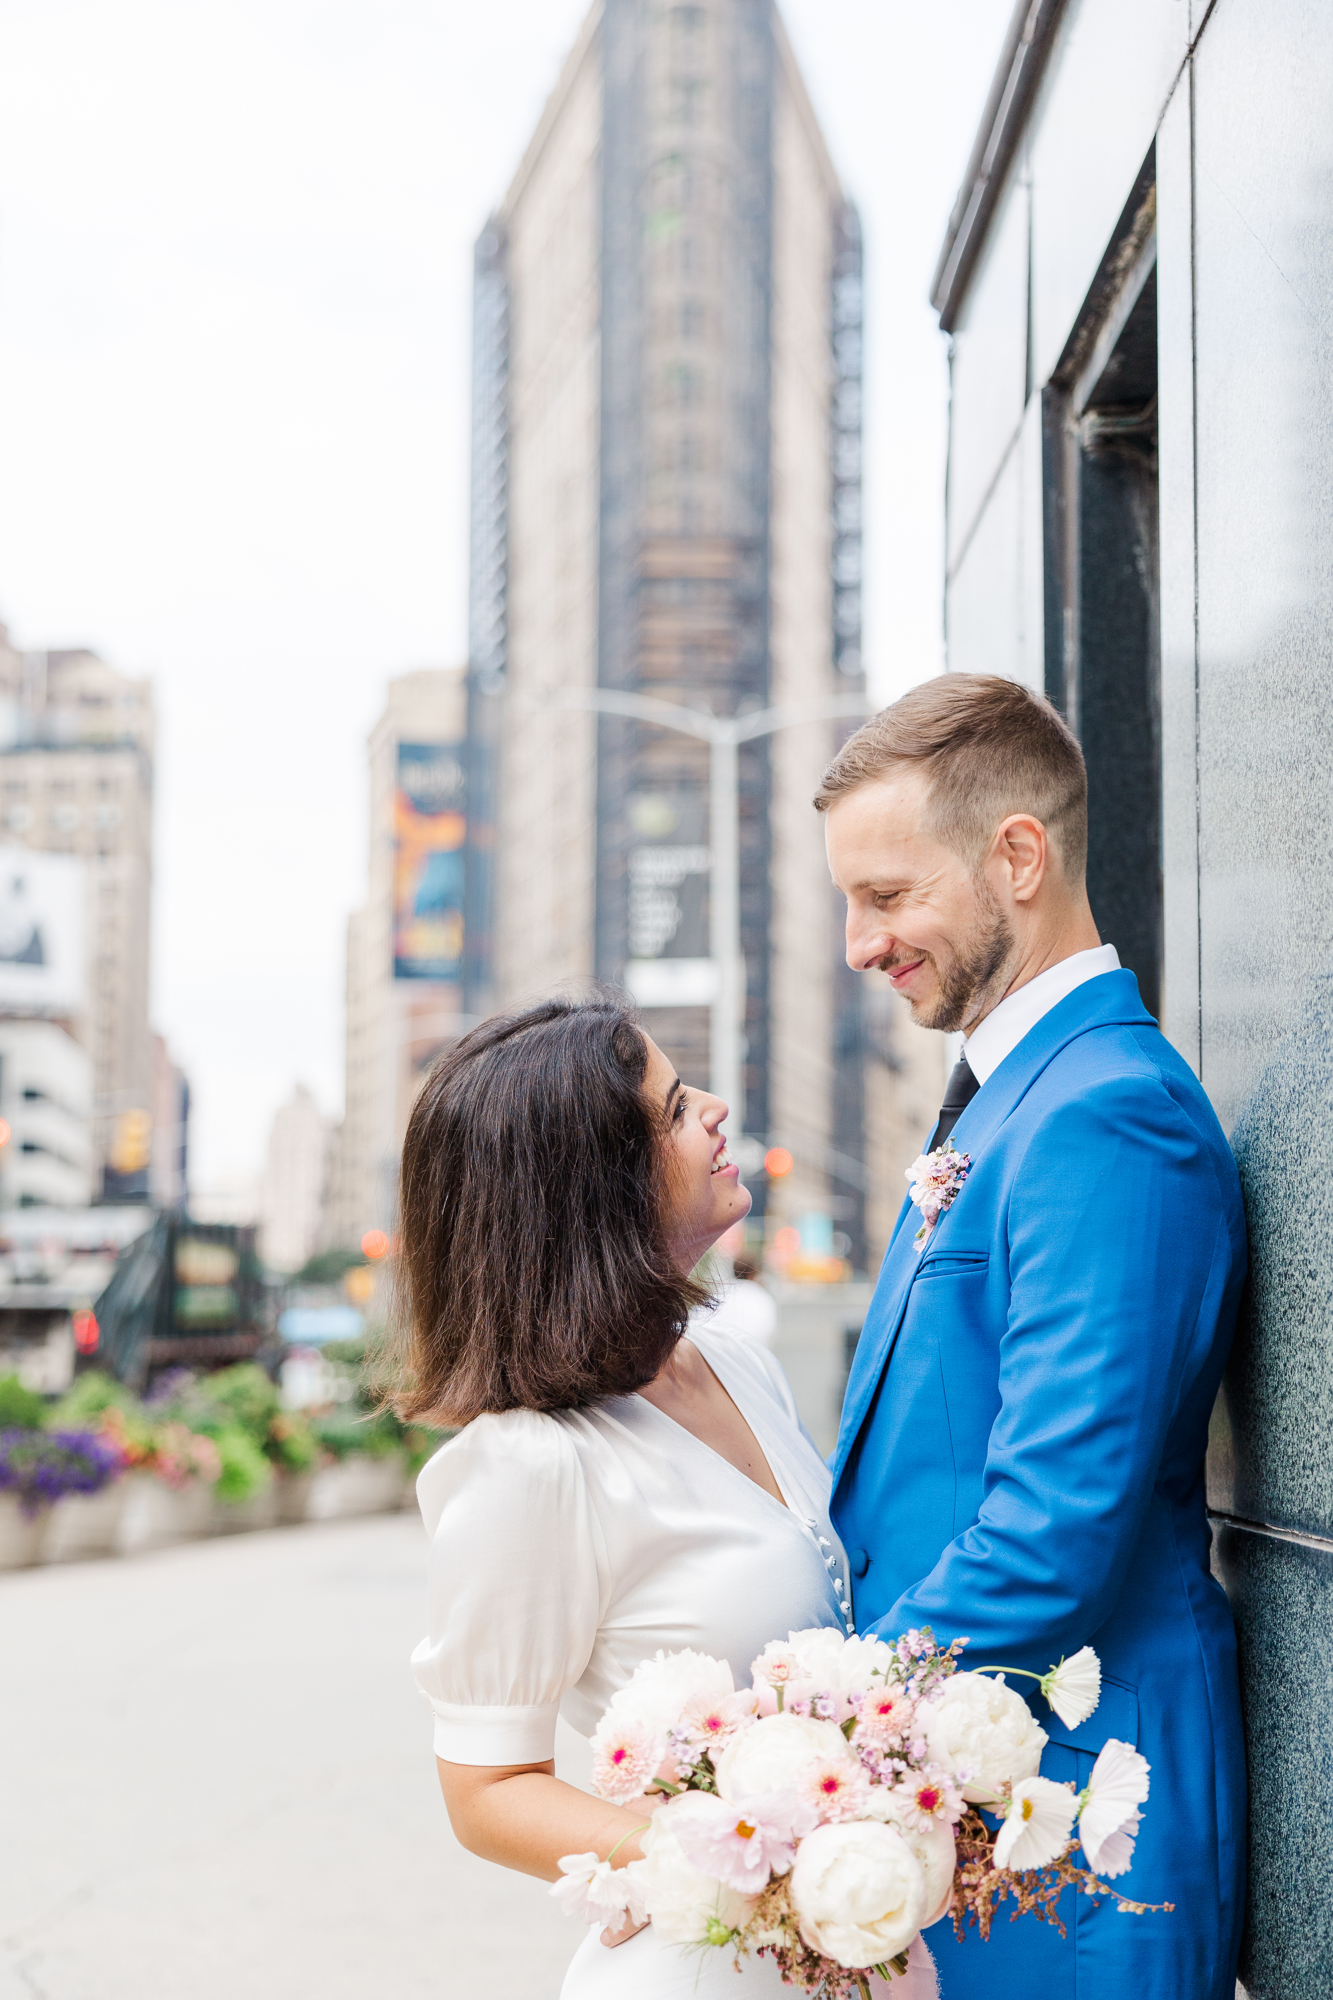 The Cost of New York Photographers for an Awesome Elopement